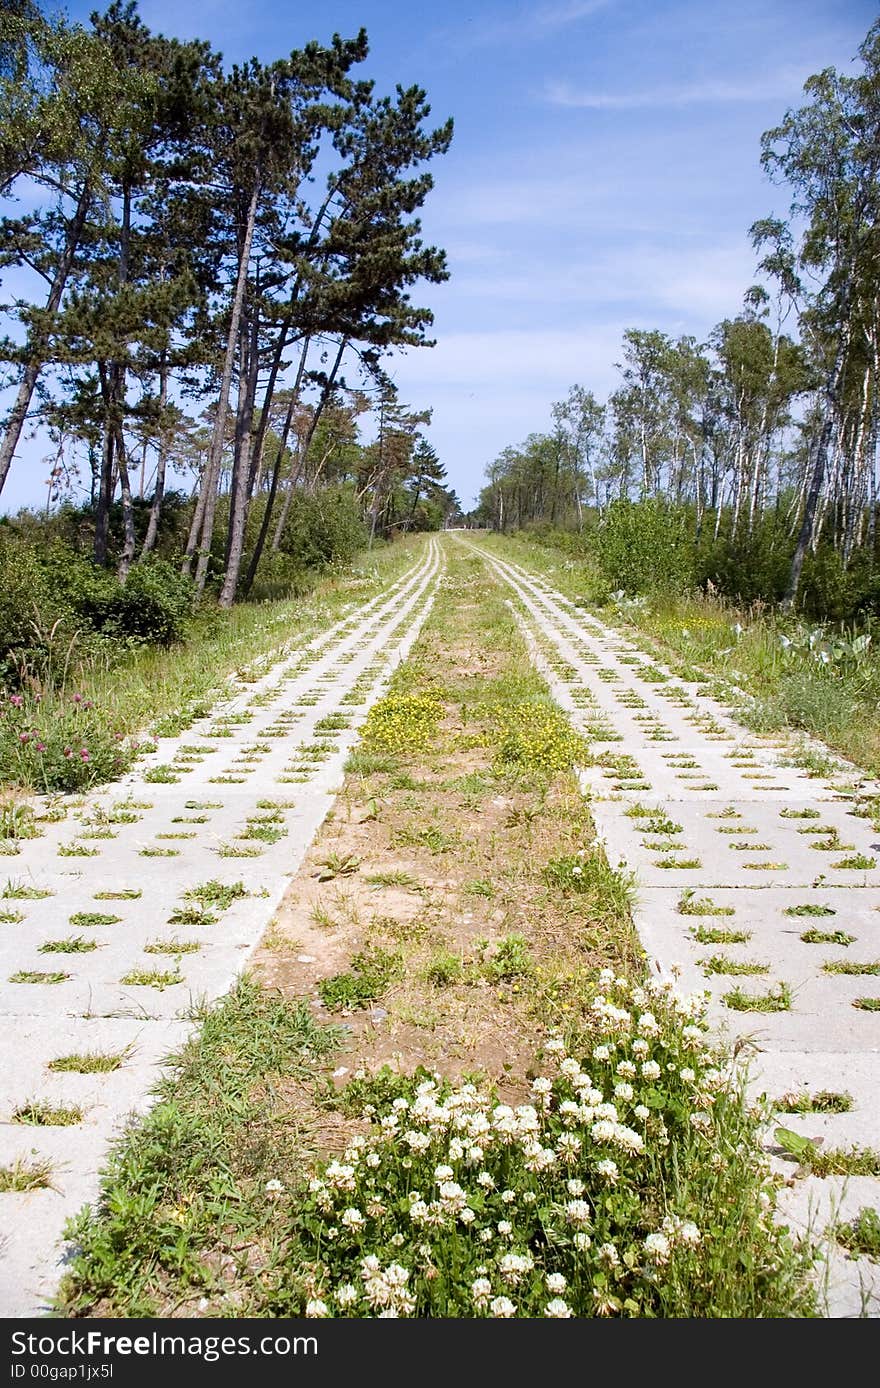 An empty narrow path made of concrete slabs, leading deep into the background. The Baltic sea shoreline, some trees. Clear blue sky.

<a href='http://www.dreamstime.com/baltic-sea-scenics.-seaside-towns-and-villages-as-well.-rcollection3976-resi208938' STYLE='font-size:13px; text-decoration: blink; color:#FF0000'><b>MORE BALTIC PHOTOS »</b></a>. An empty narrow path made of concrete slabs, leading deep into the background. The Baltic sea shoreline, some trees. Clear blue sky.

<a href='http://www.dreamstime.com/baltic-sea-scenics.-seaside-towns-and-villages-as-well.-rcollection3976-resi208938' STYLE='font-size:13px; text-decoration: blink; color:#FF0000'><b>MORE BALTIC PHOTOS »</b></a>